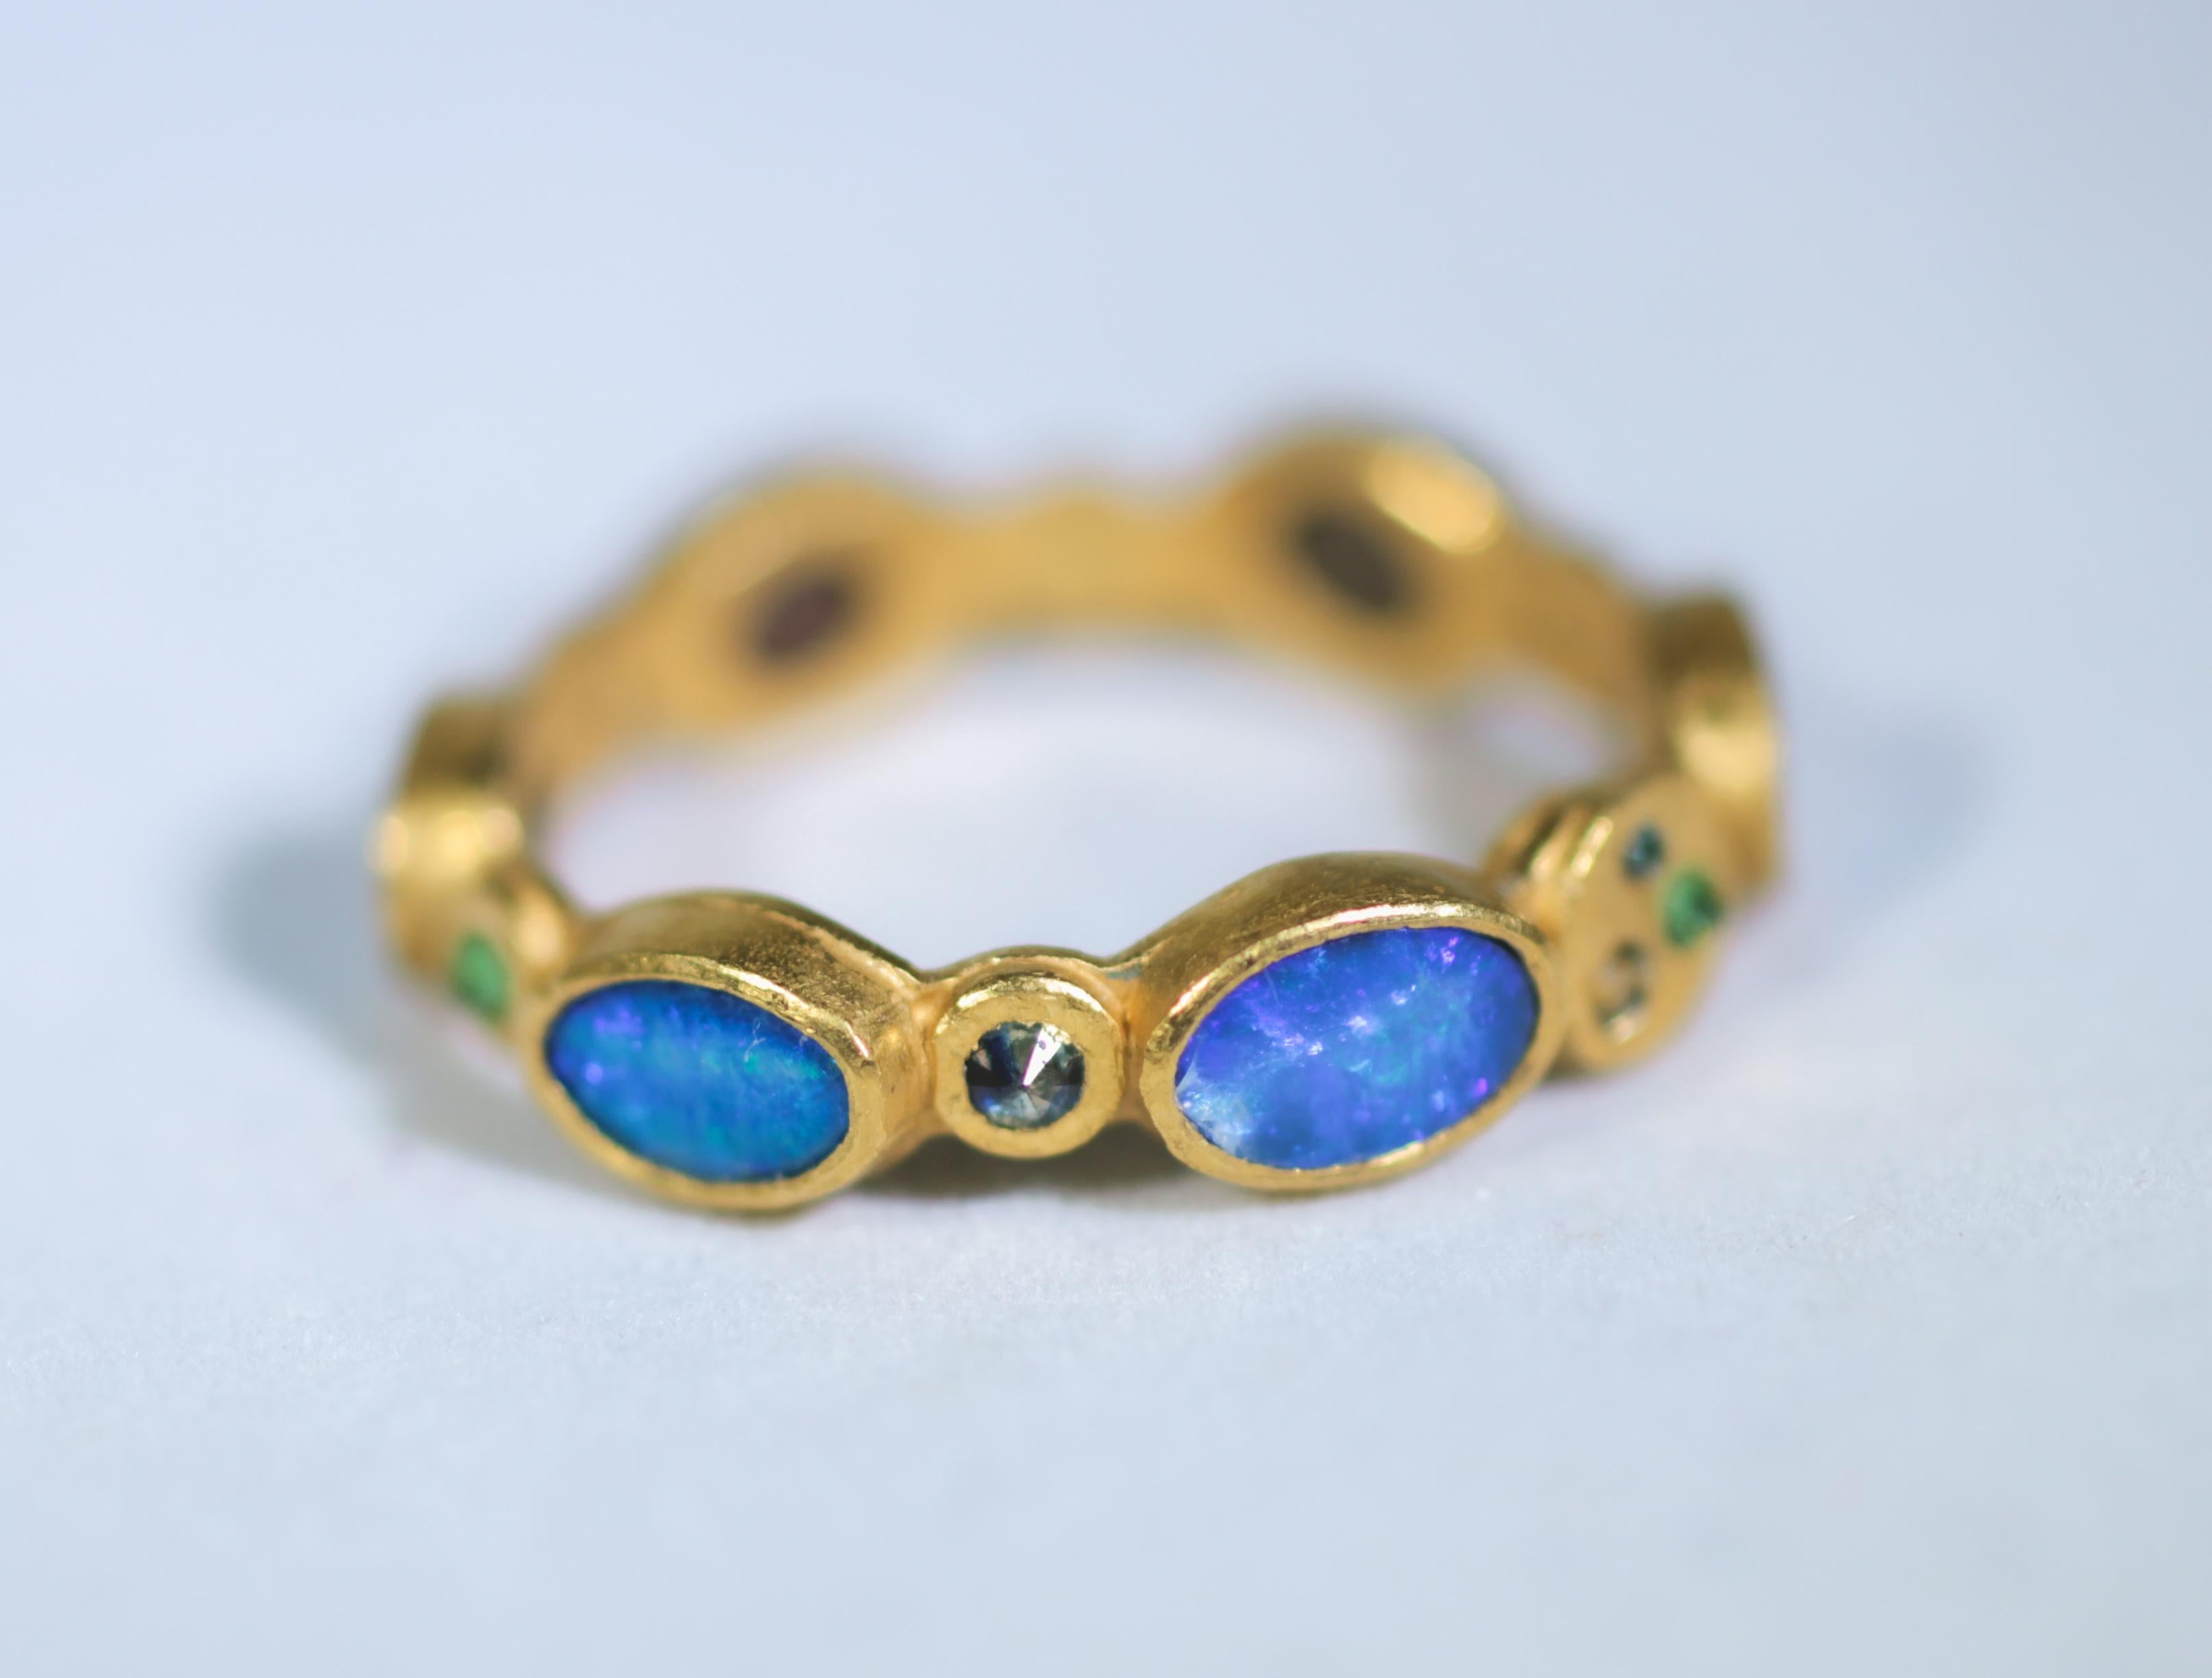 22K gold fashion band ring. Rich and exotic Black Opals are bezels set in solid 22k yellow gold and accented with color diamonds, sapphires, and Tsavorite garnets creating a bright and interesting conversation piece. We love using opals in our